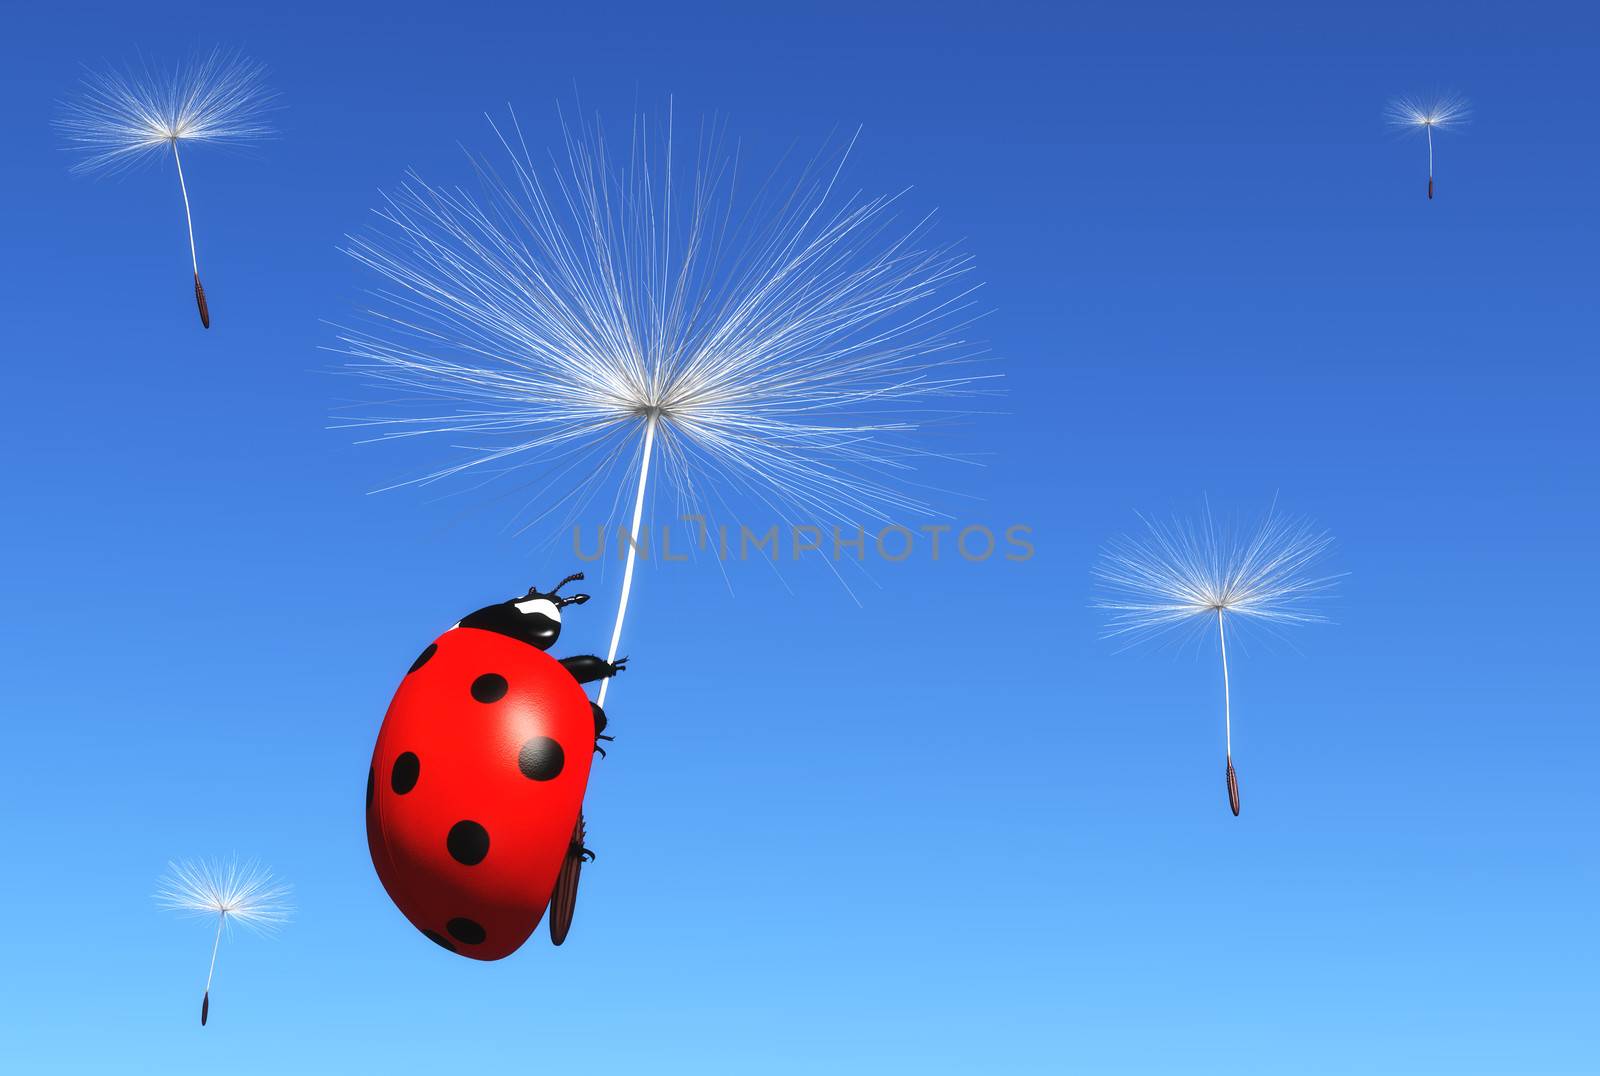 a ladybug is clinging to a floret of a dandelion which is carried by the wind along with others florets, on a blue sky background